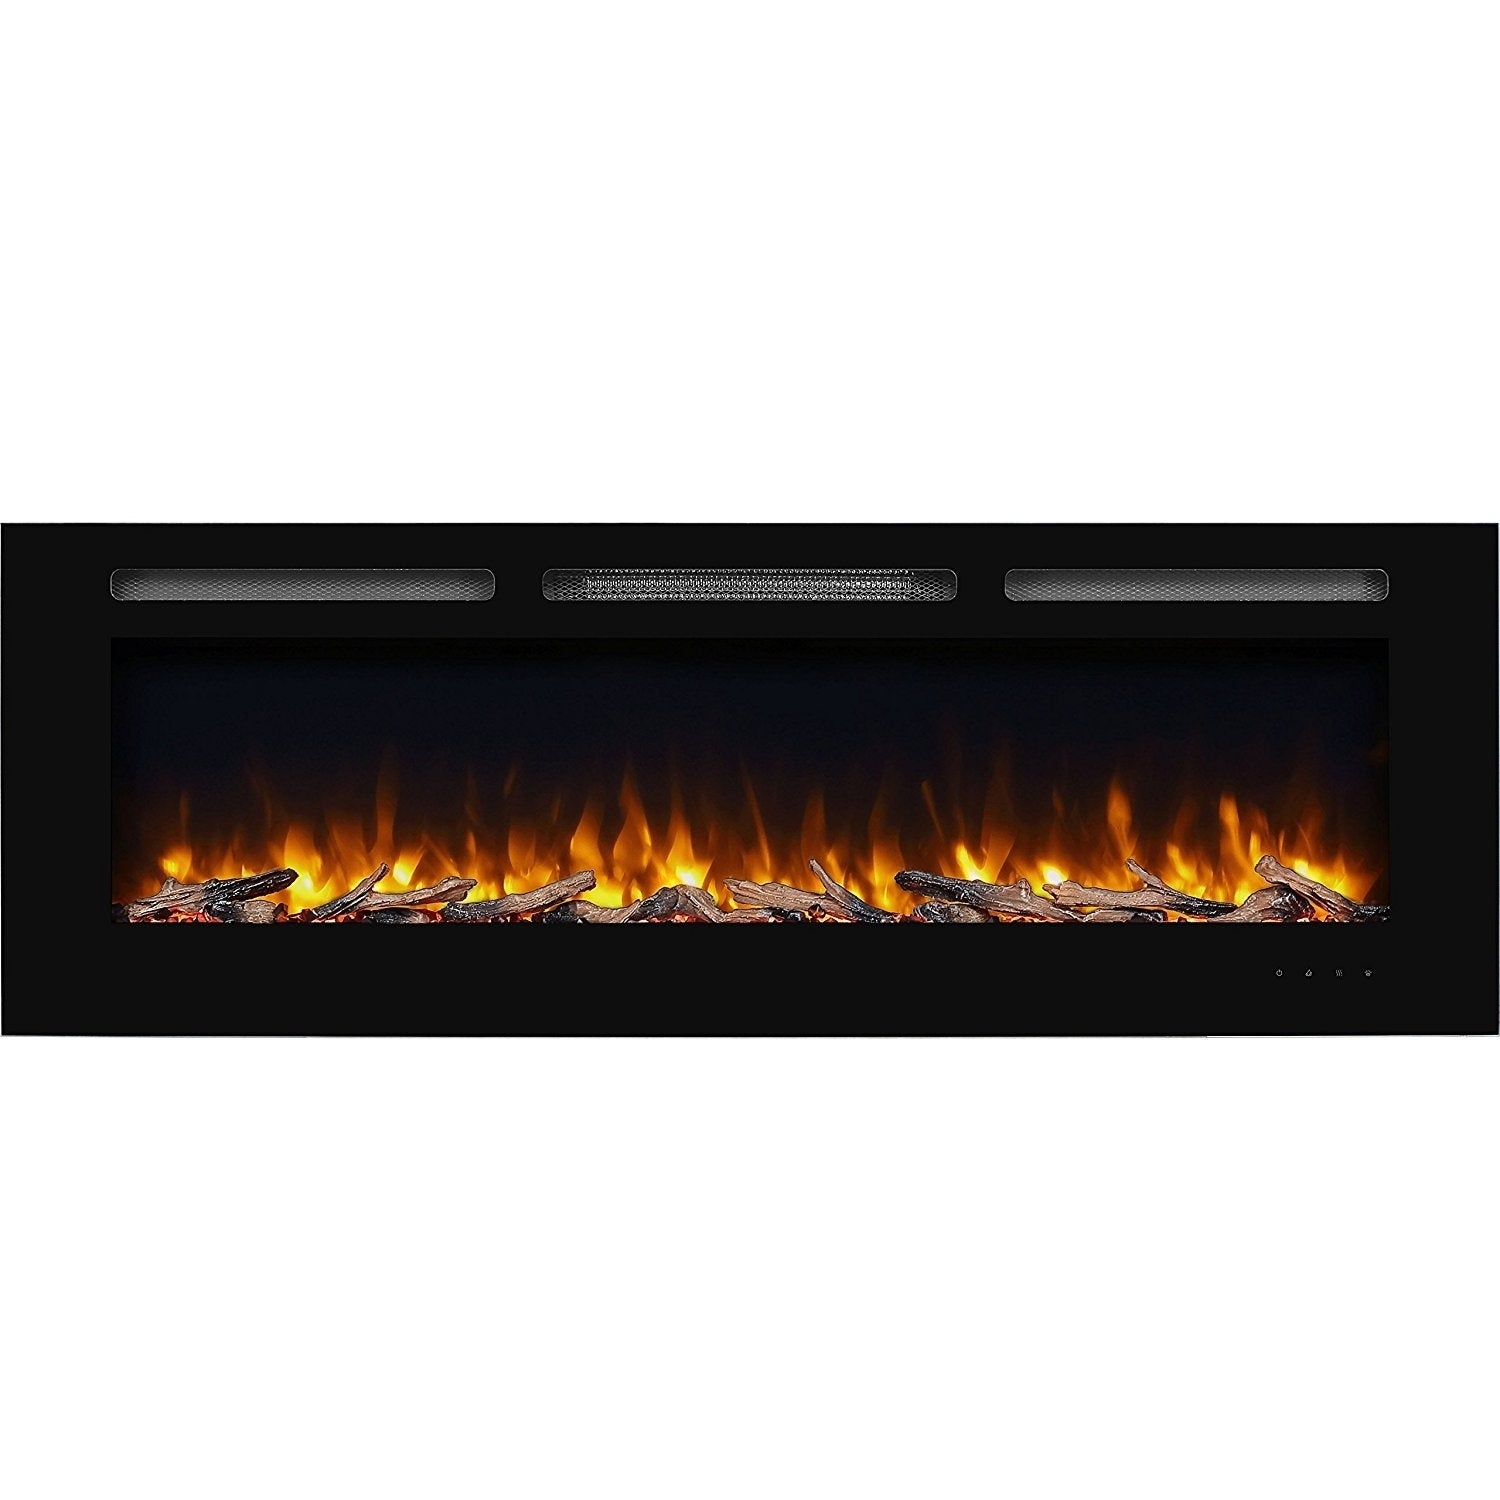 Electric Fireplaces Direct Outlet Elegant 60" Alice In Wall Recessed Electric Fireplace 1500w Black